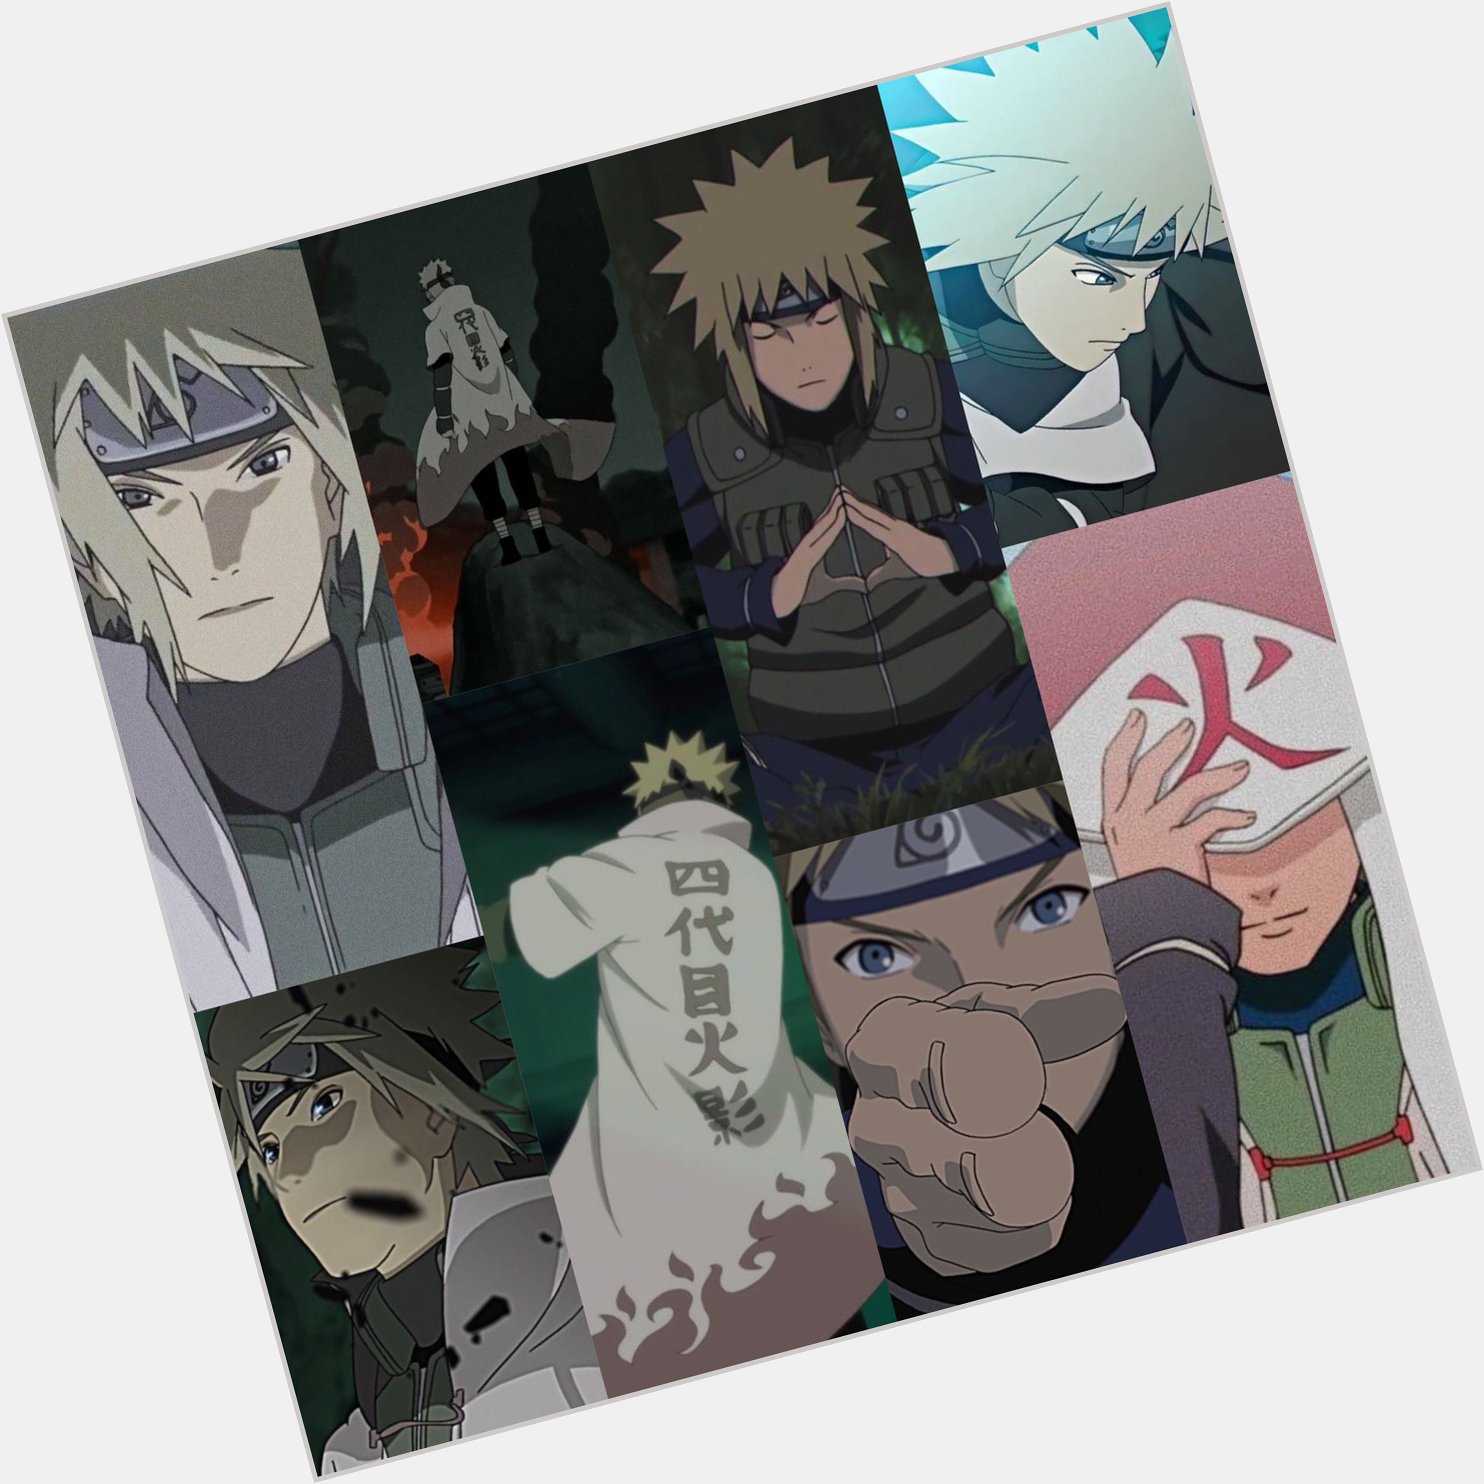 Happy birthday to one of the most beloved characters in Naruto, The Fourth Hokage Minato Namikaze! 